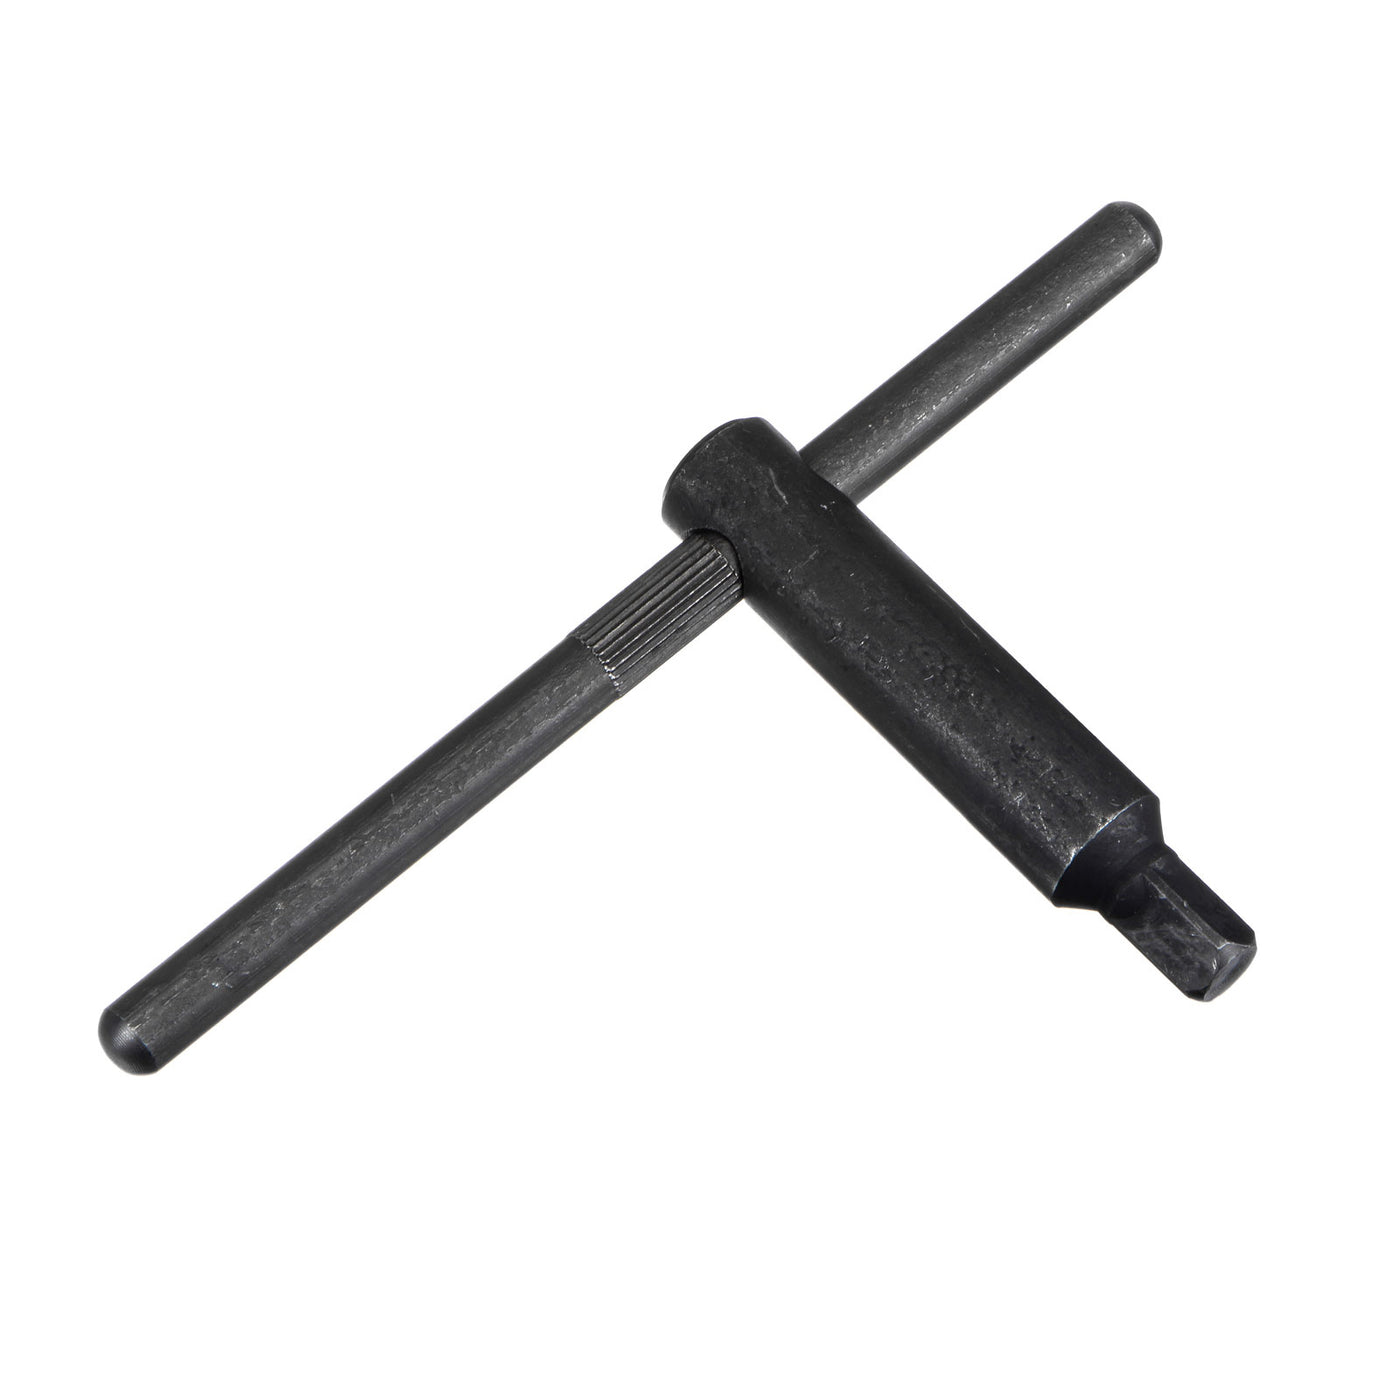 Uxcell Uxcell Lathe Chuck Wrench, 14mm Square Head Key Spanner Tool (L200x220mm)